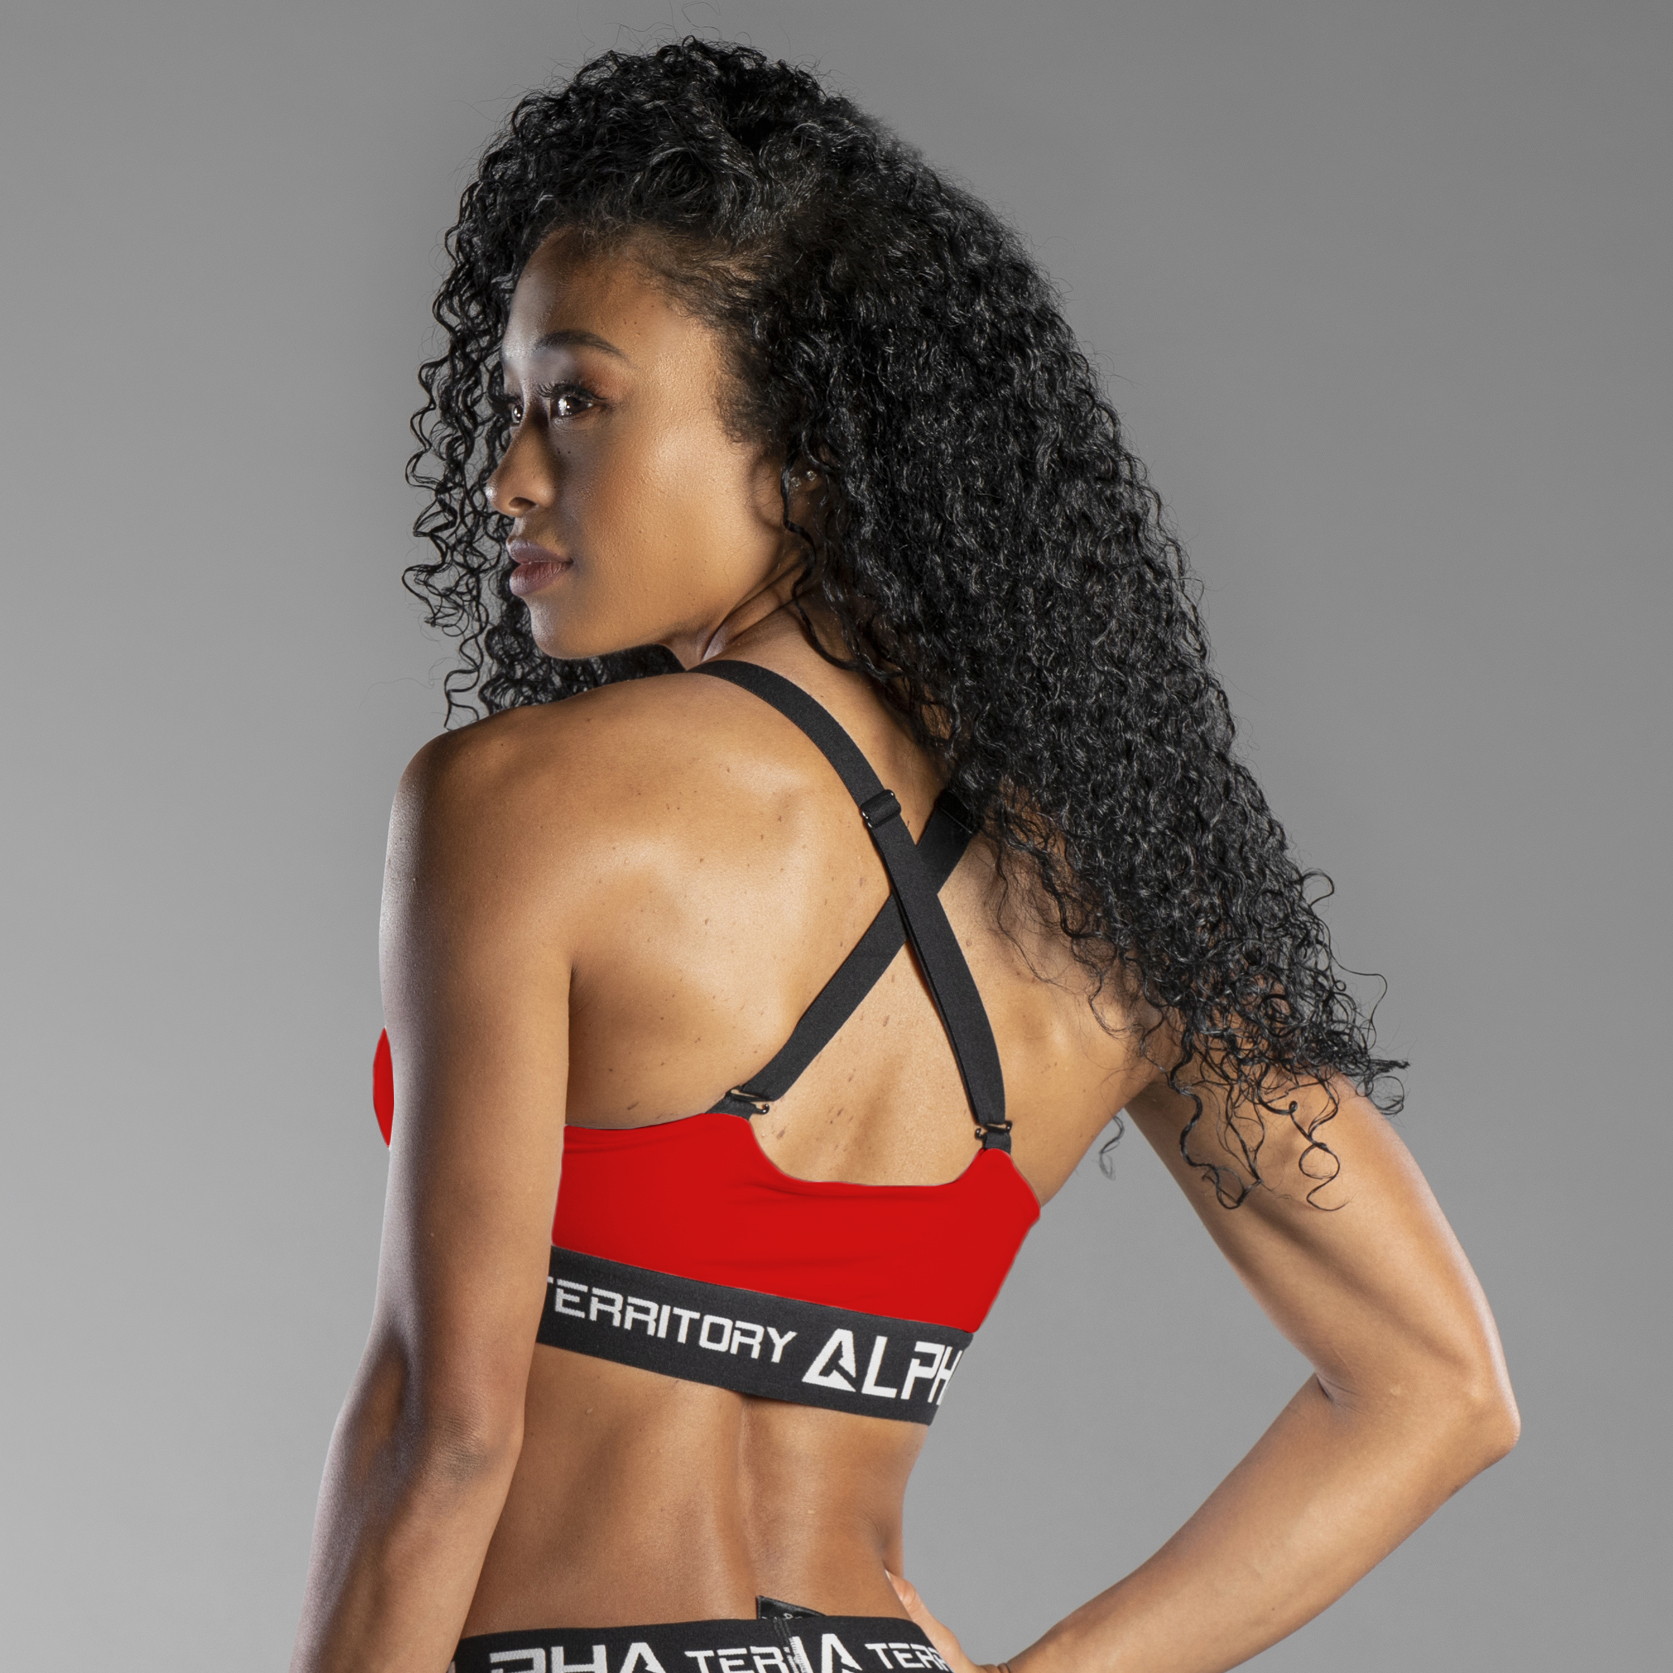 https://alphaterritory.com/wp-content/uploads/2022/02/AT-Womens-Sports-Bra-Red-1.jpg